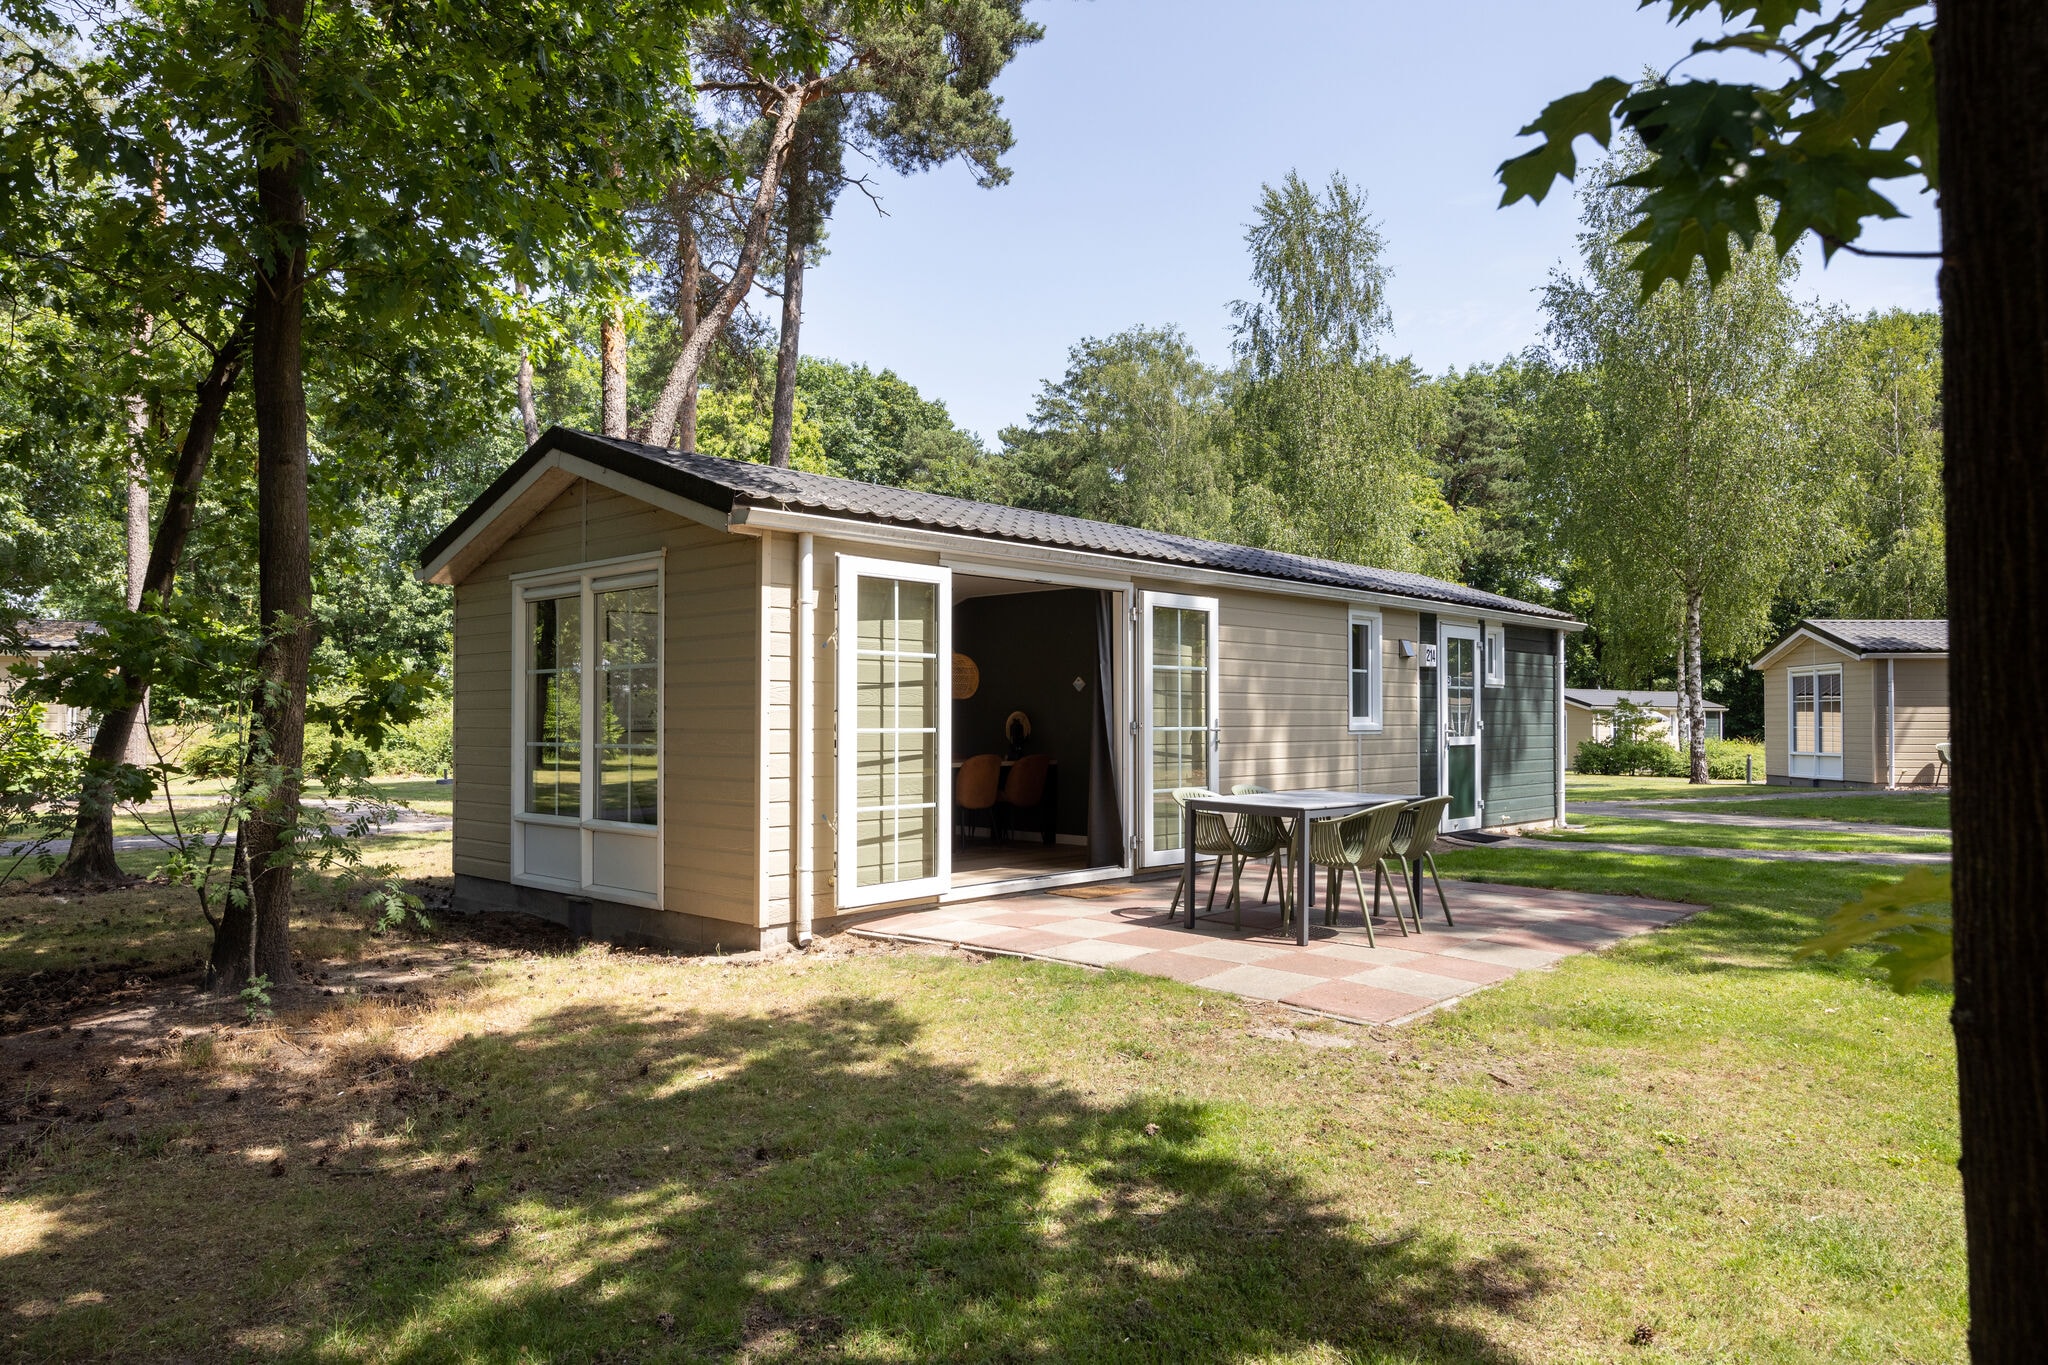 Chalet with a dishwasher, in a car-free park